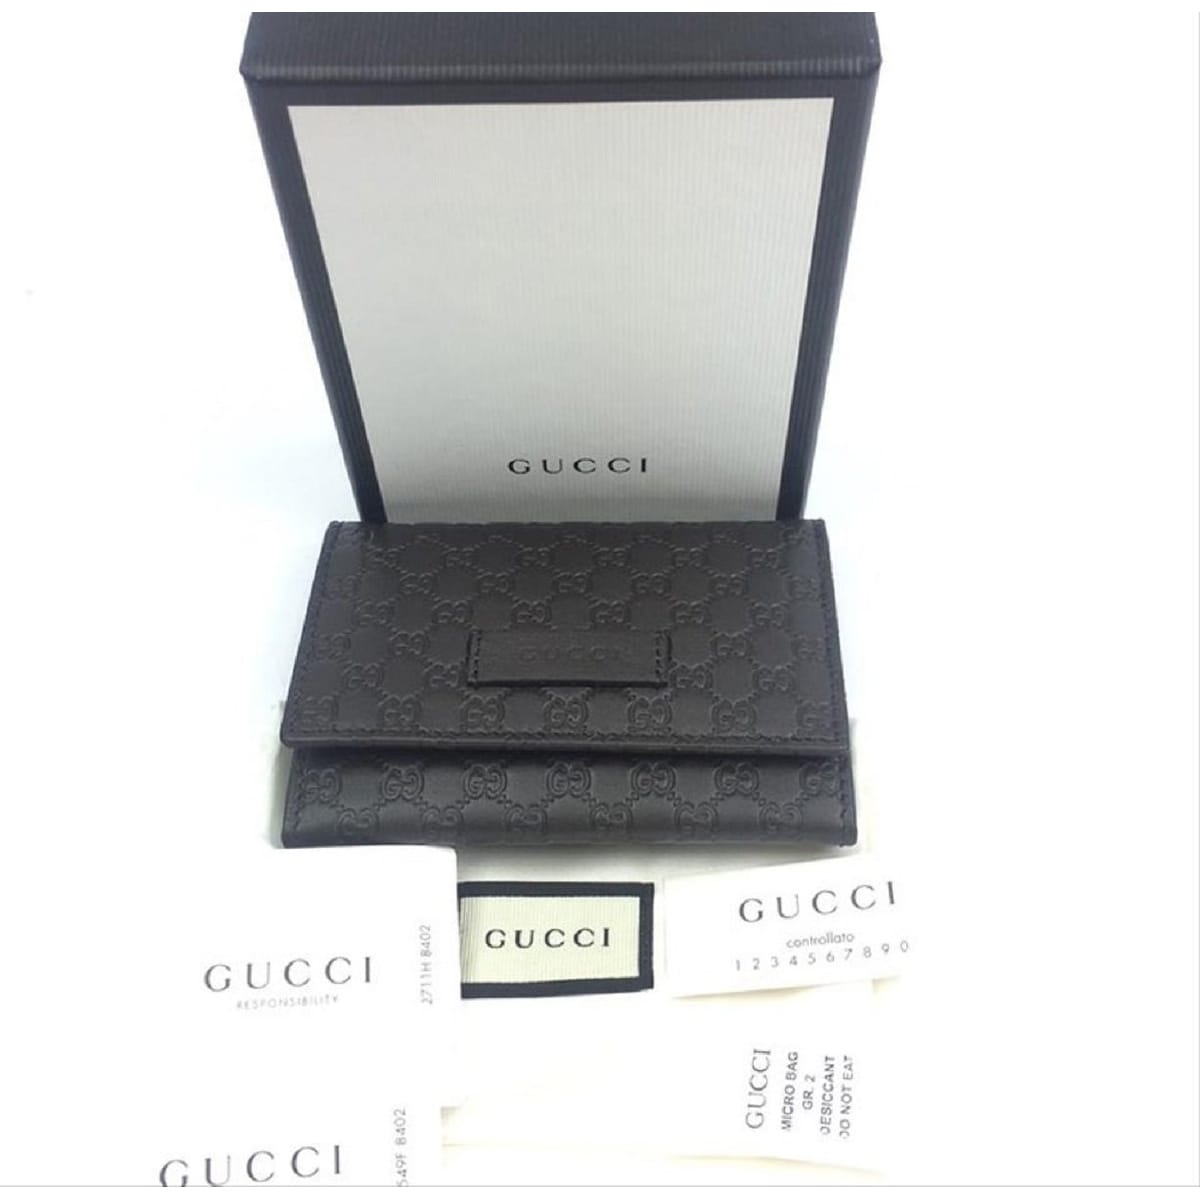 black friday deals on gucci bags